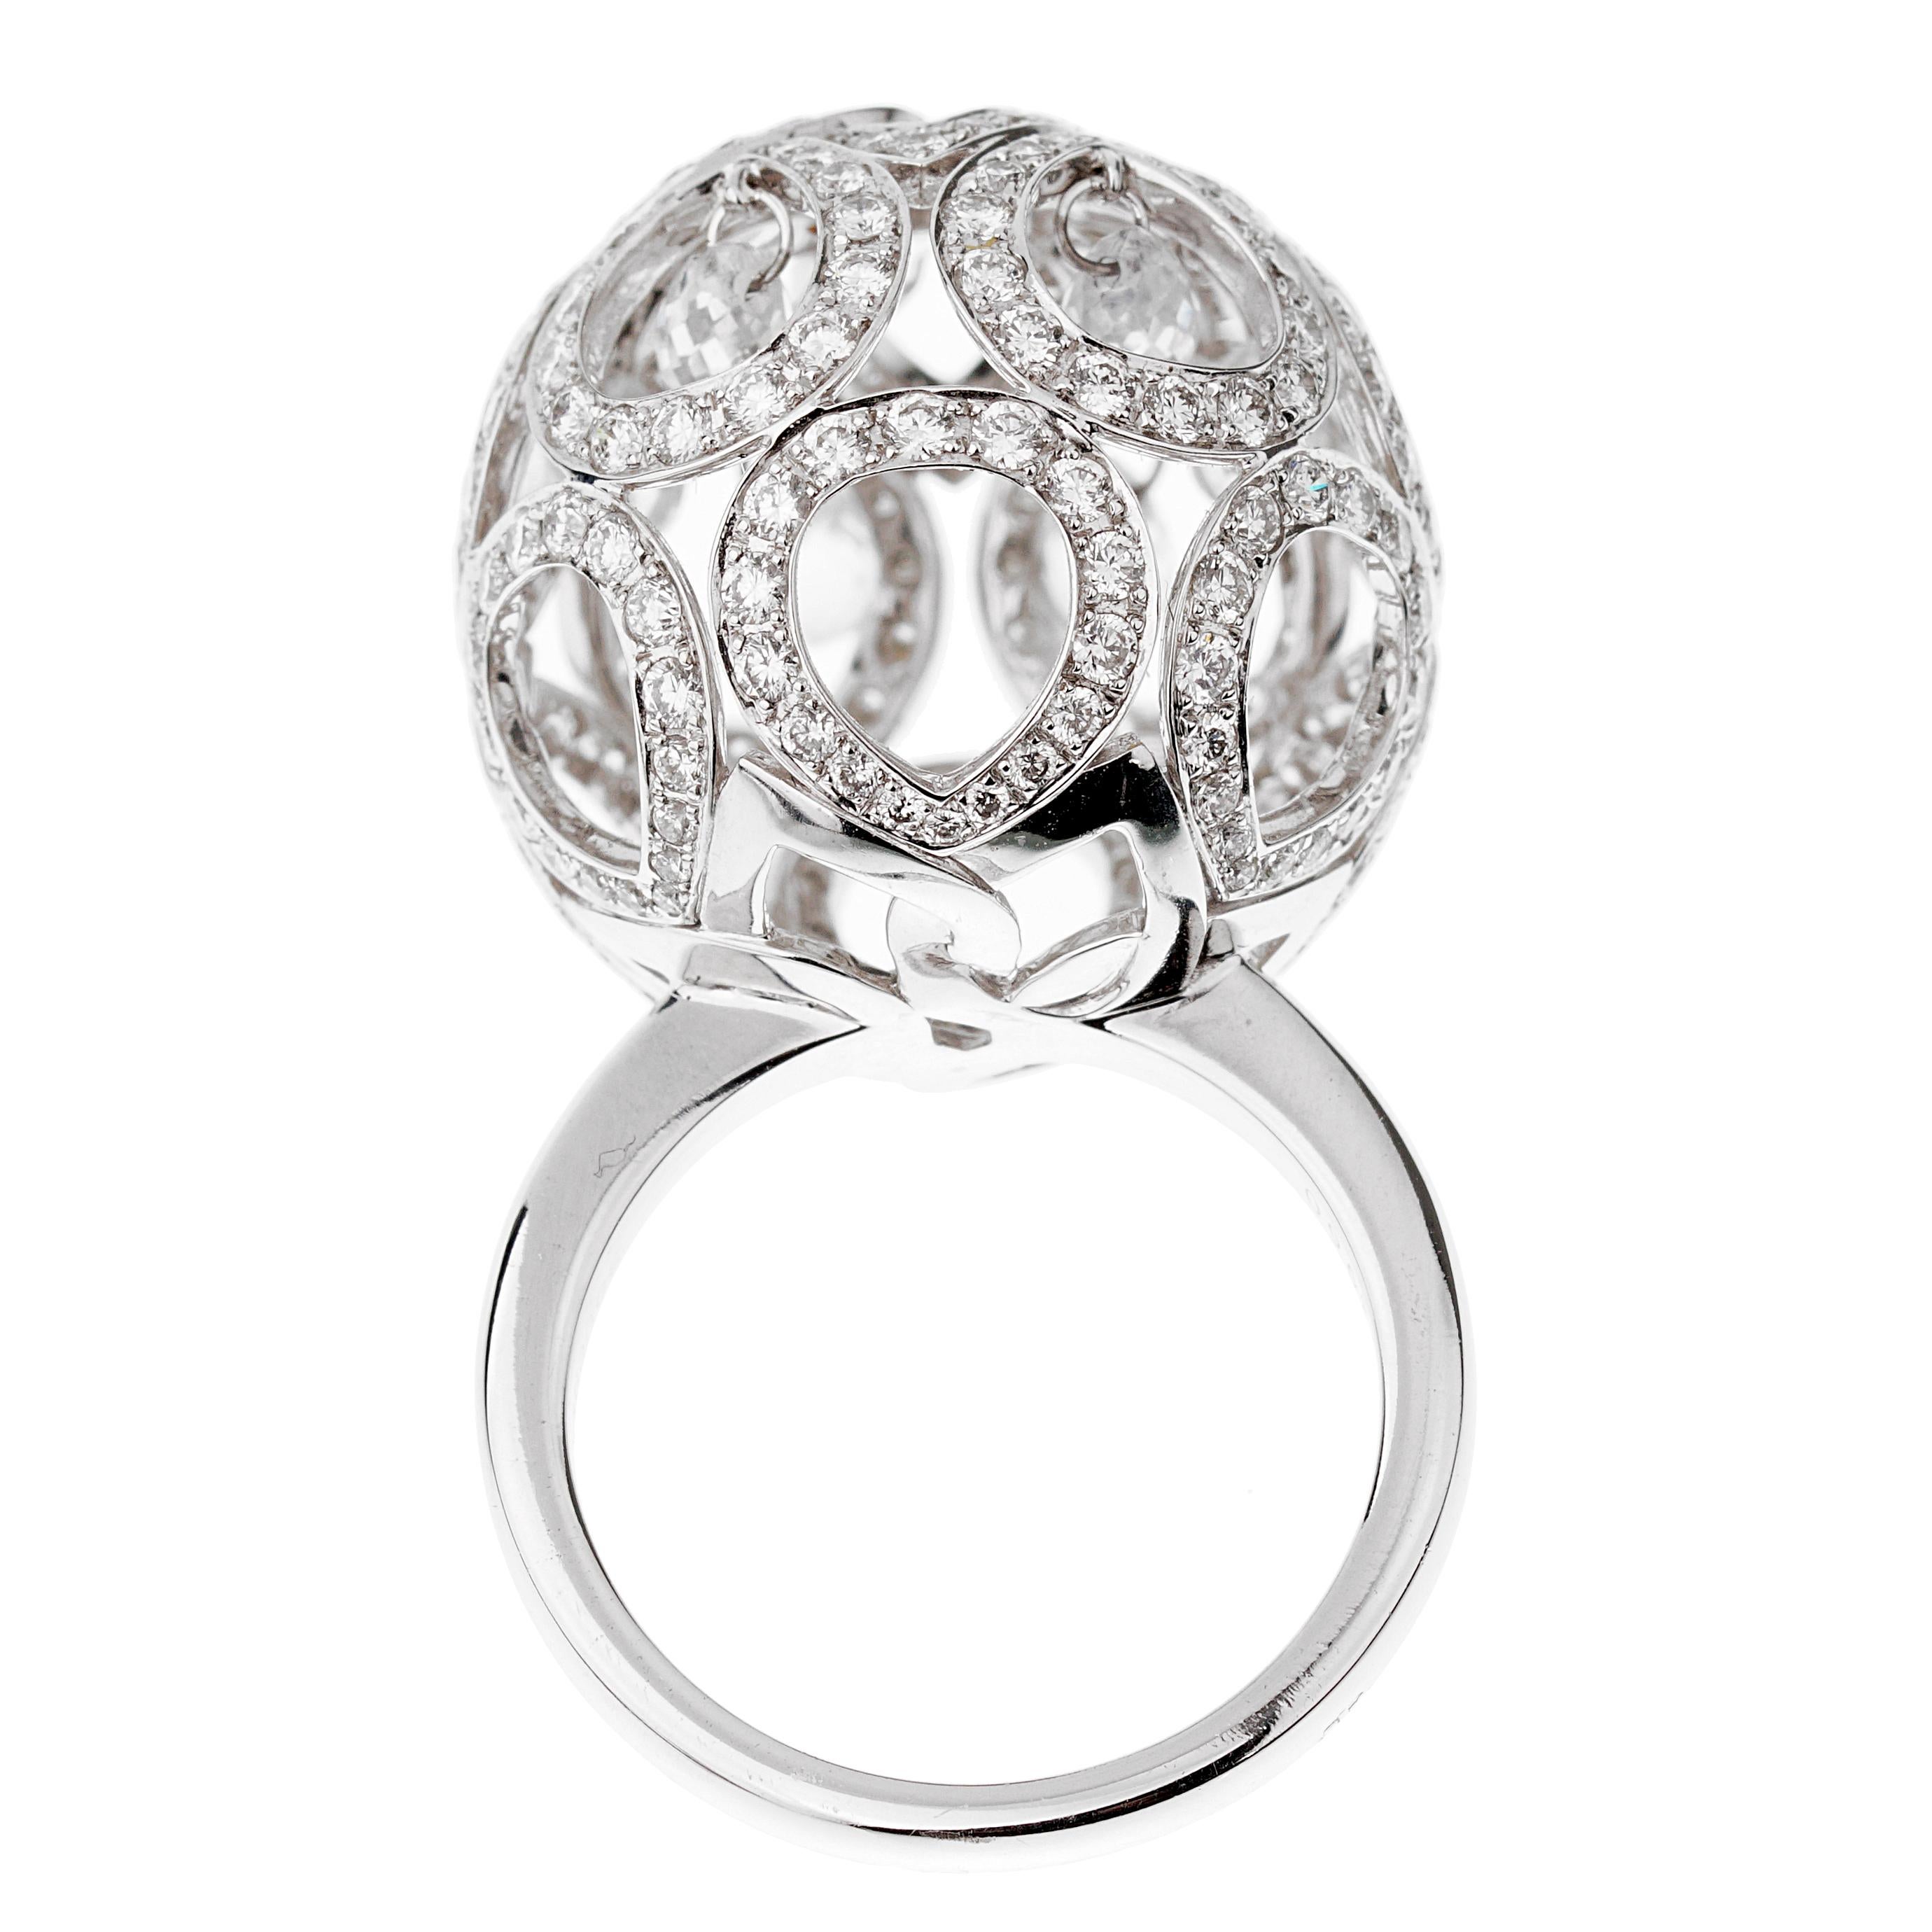 A magnificent Boucheron diamond cocktail ring showcasing an intricate design adorned with round brilliant cut diamonds. The inner sections have briolette white sapphires in shimmering 18k white gold. The diamonds measure 2.07ct and 2.90ct in